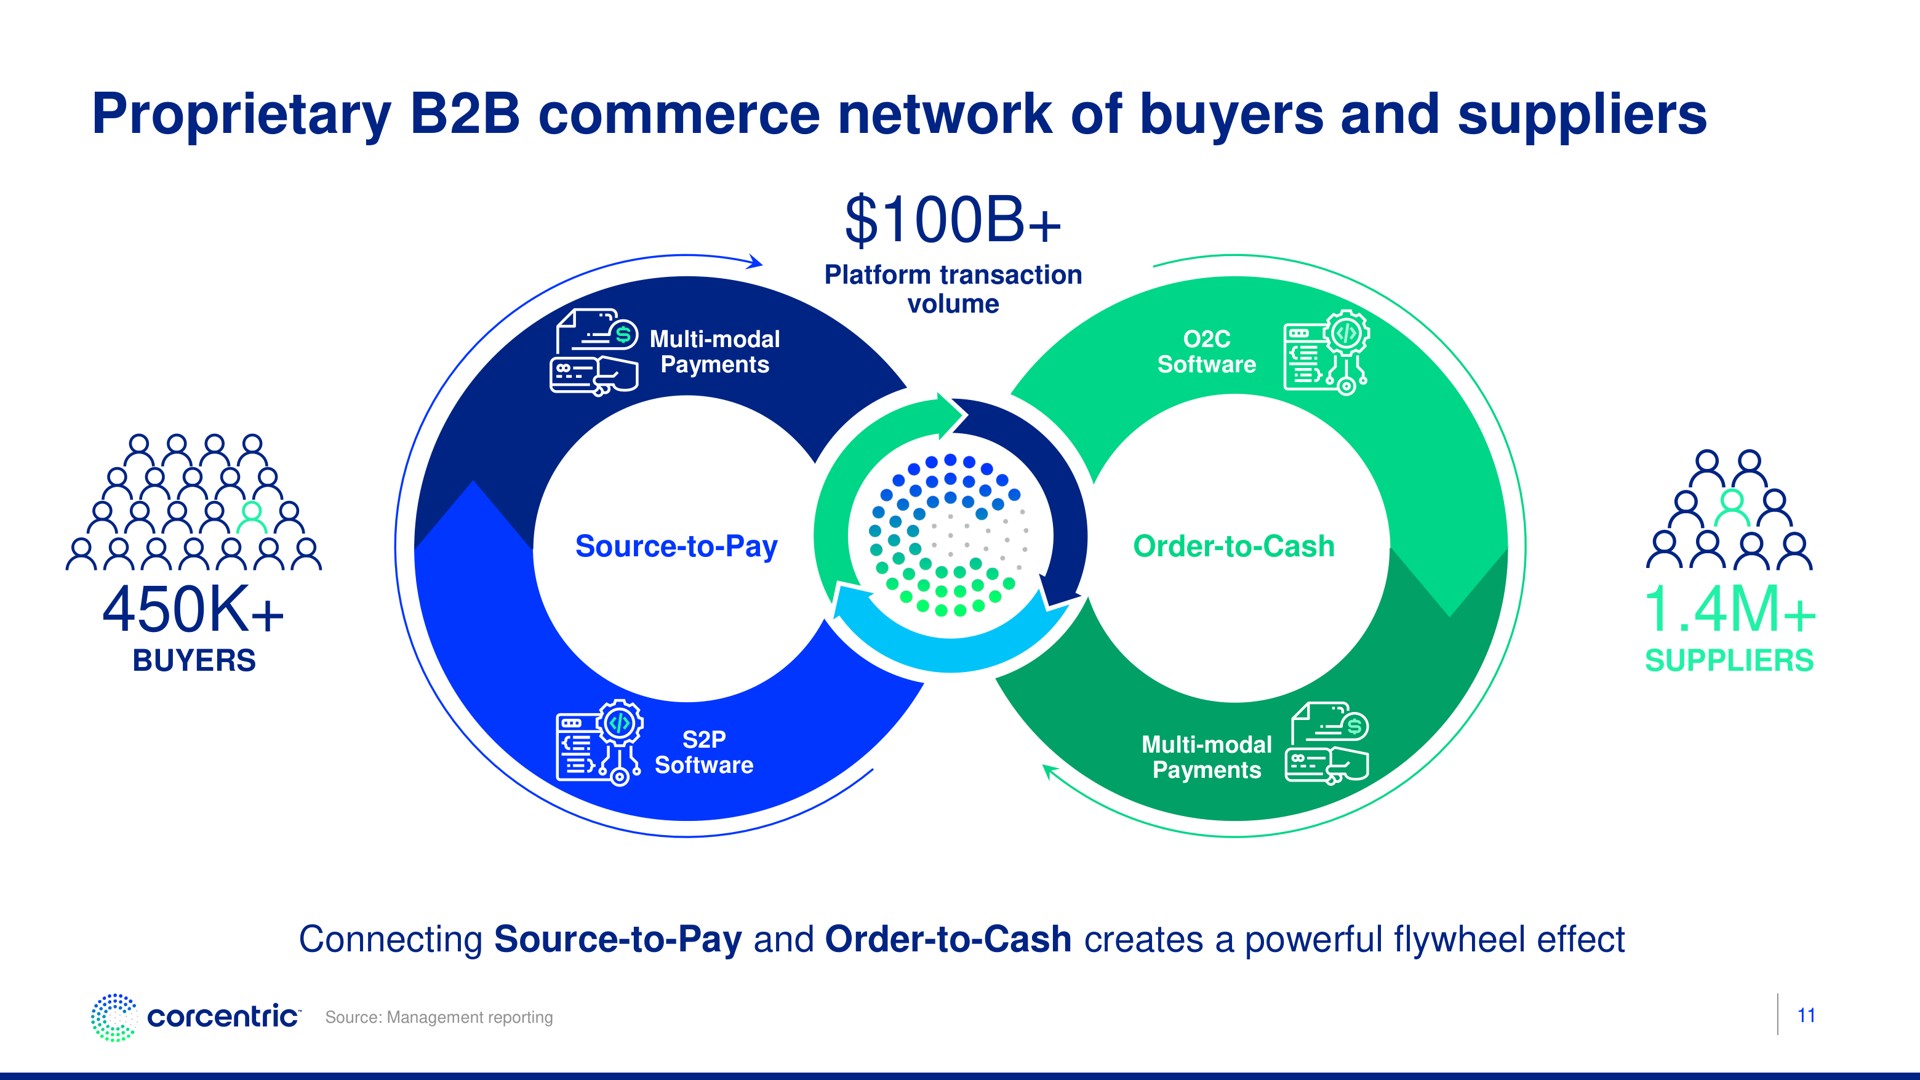 proprietary commerce network of buyers and suppliers | Corecentric